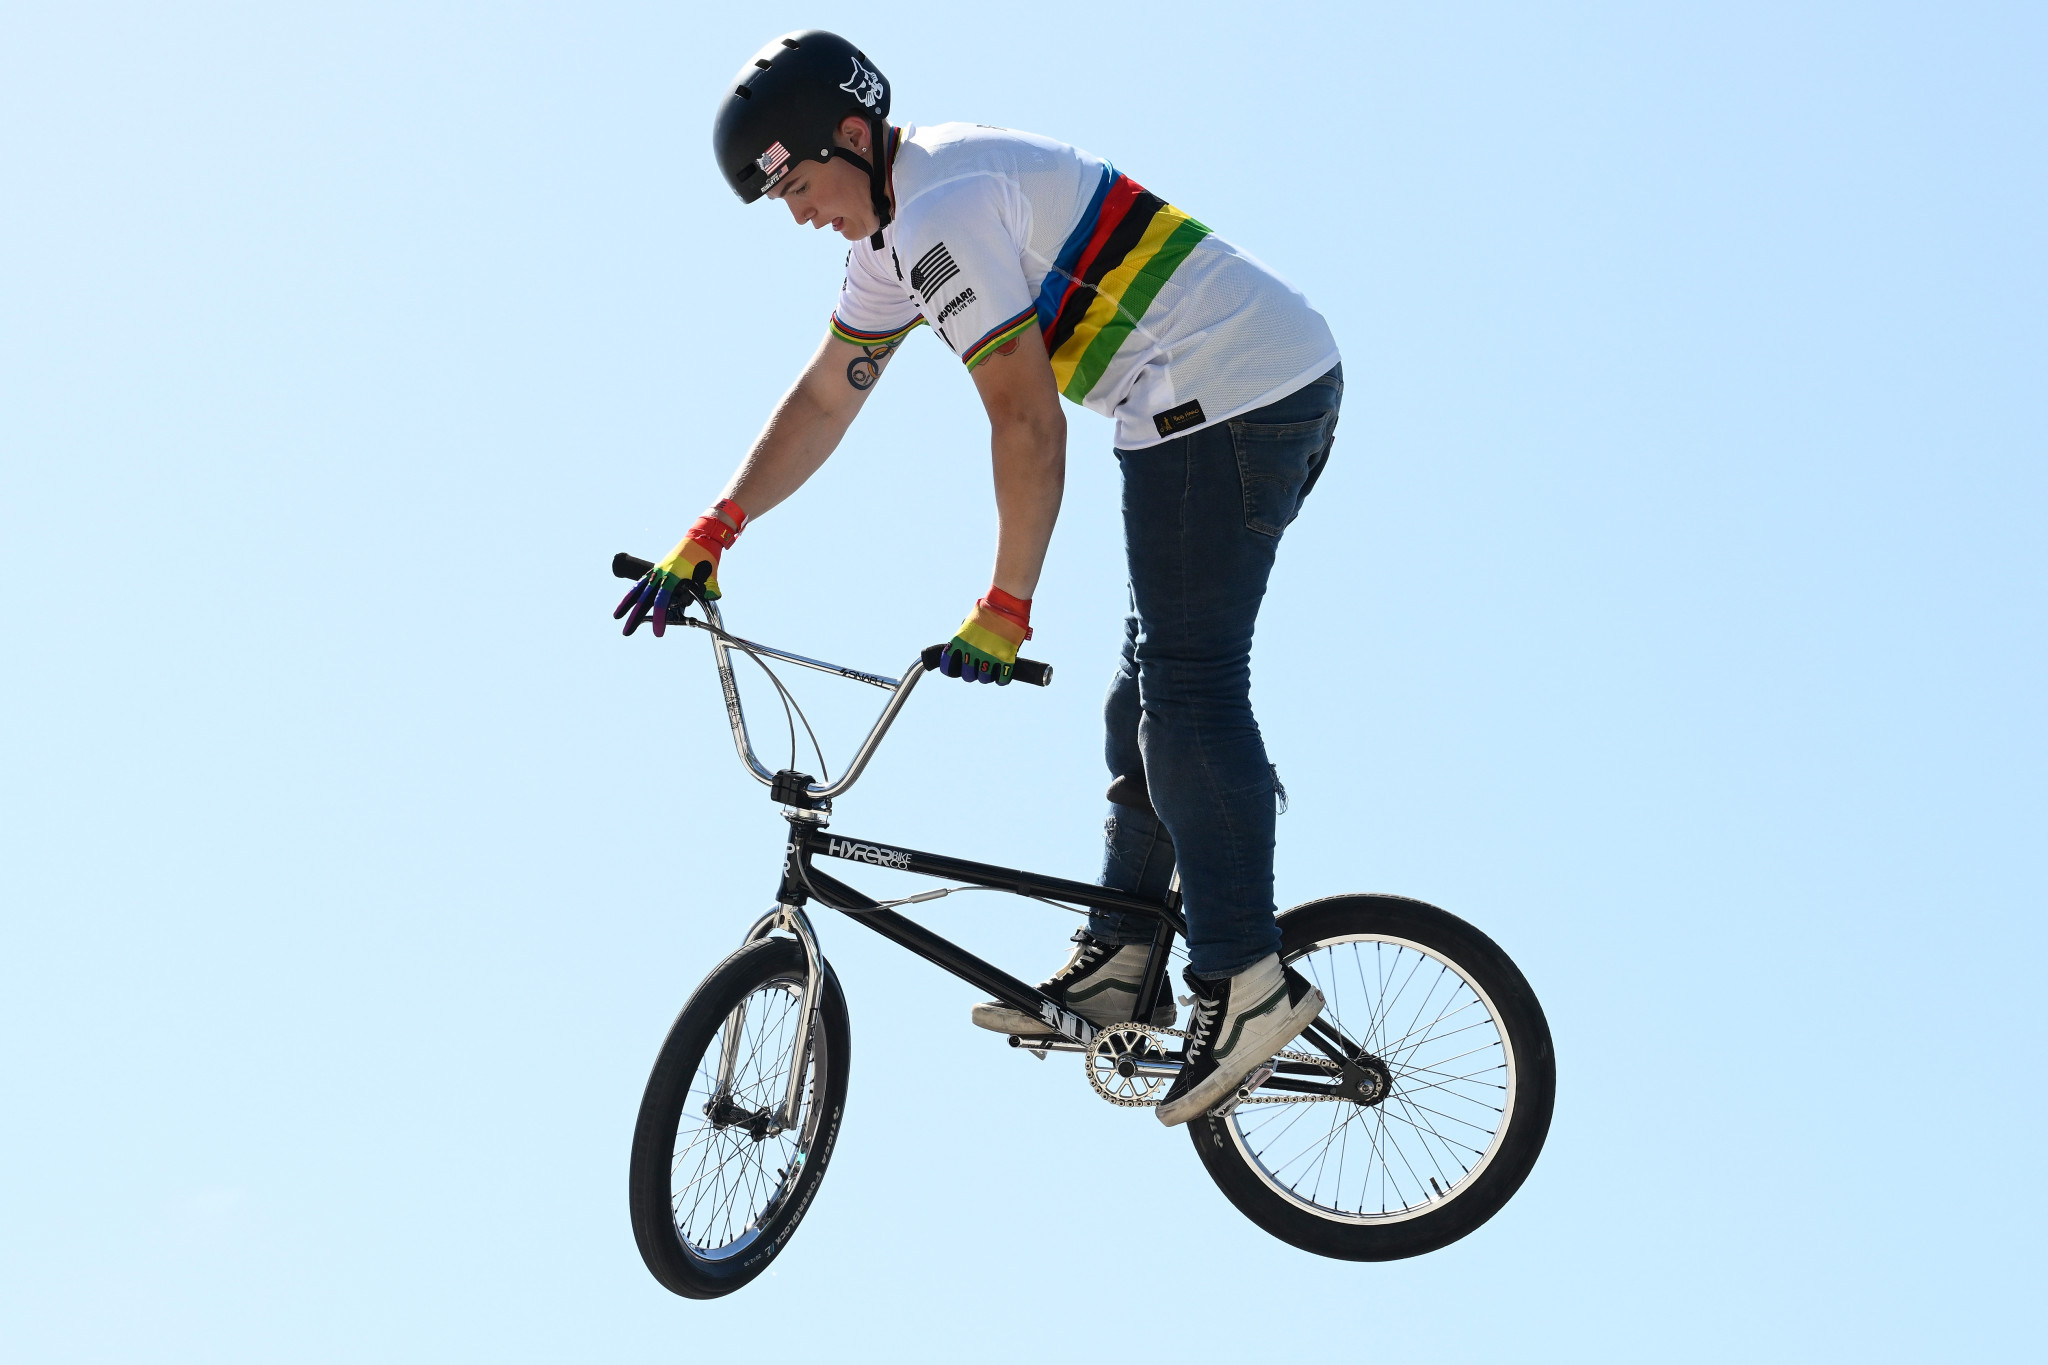 Despite falling and injuring her elbow on the first run Hannah Roberts was still triumphant in the women's event at the BMX Freestyle World Cup in Diriyah ©Getty Images  